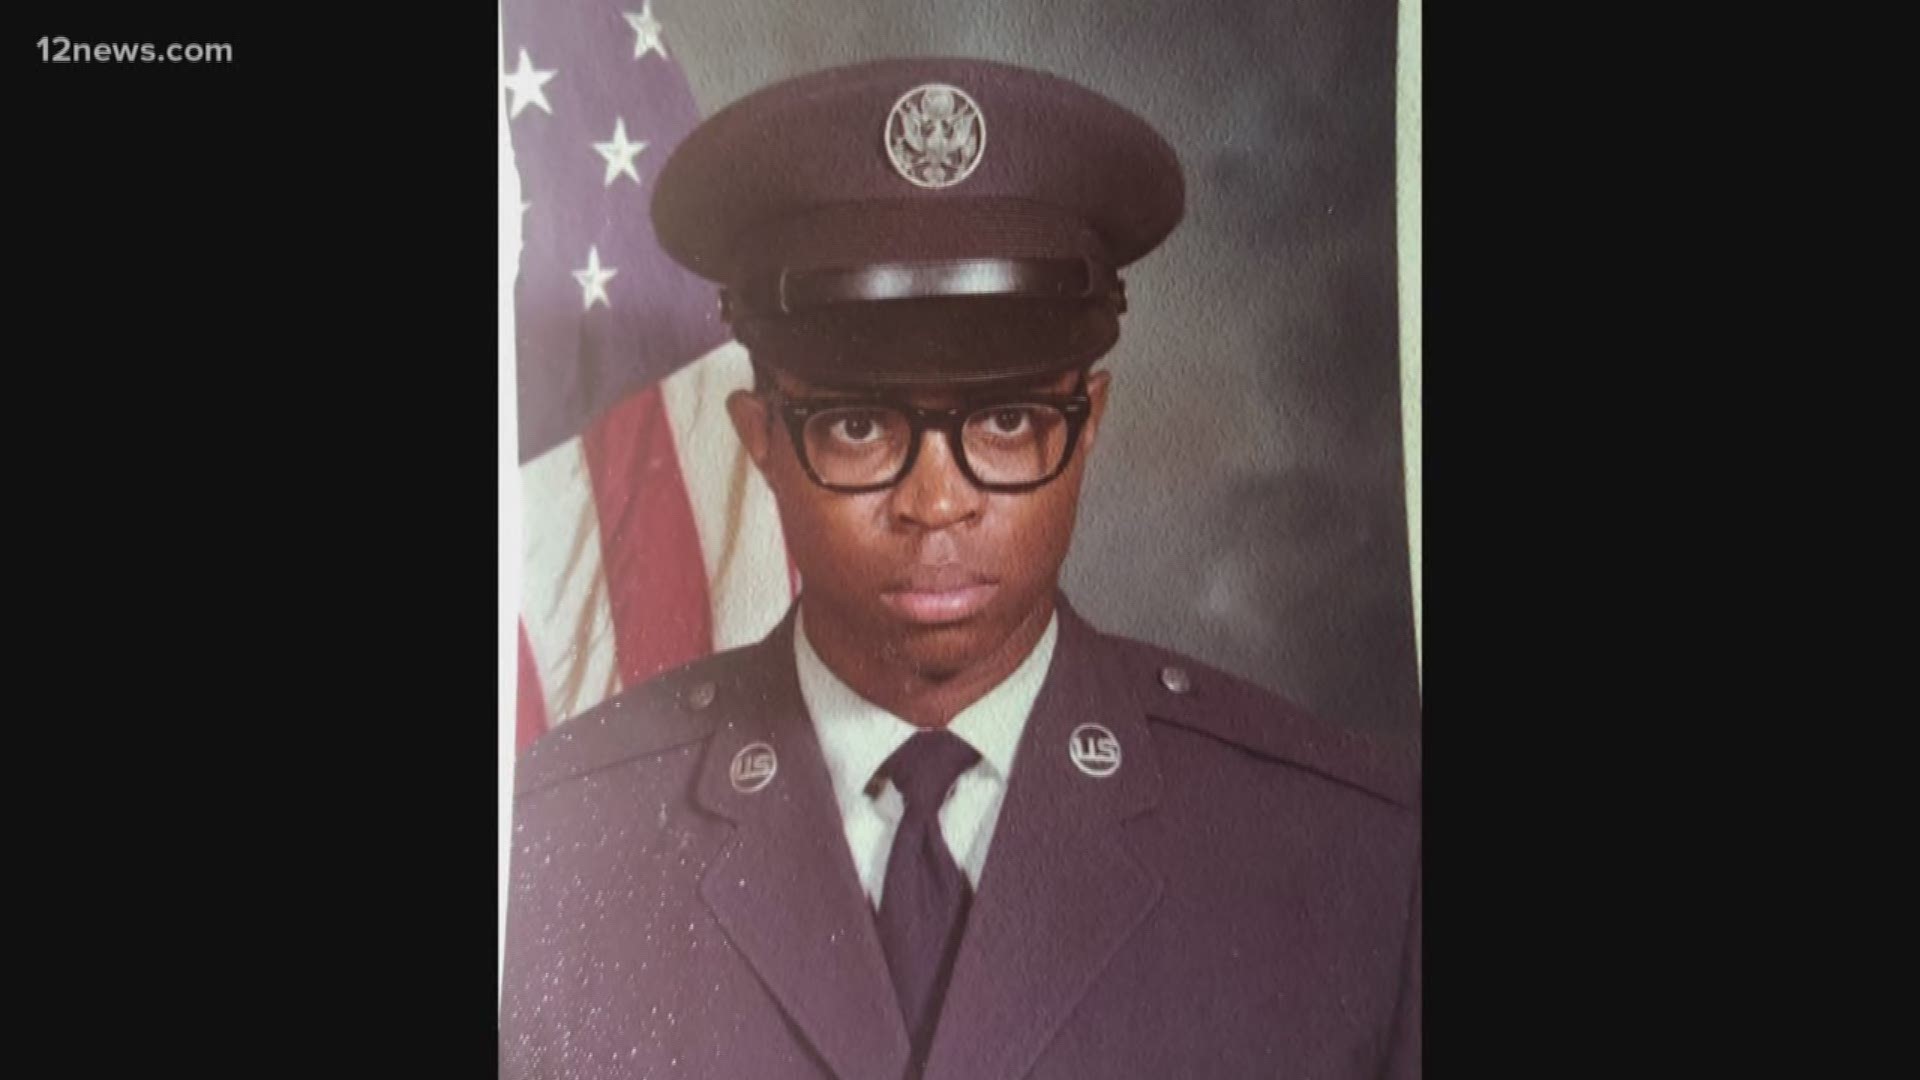 Shegog died on Feb. 15, 2019, and was an unclaimed veteran. No family members came to collect his remains—until Shegog's niece showed up at the funeral Wednesday.